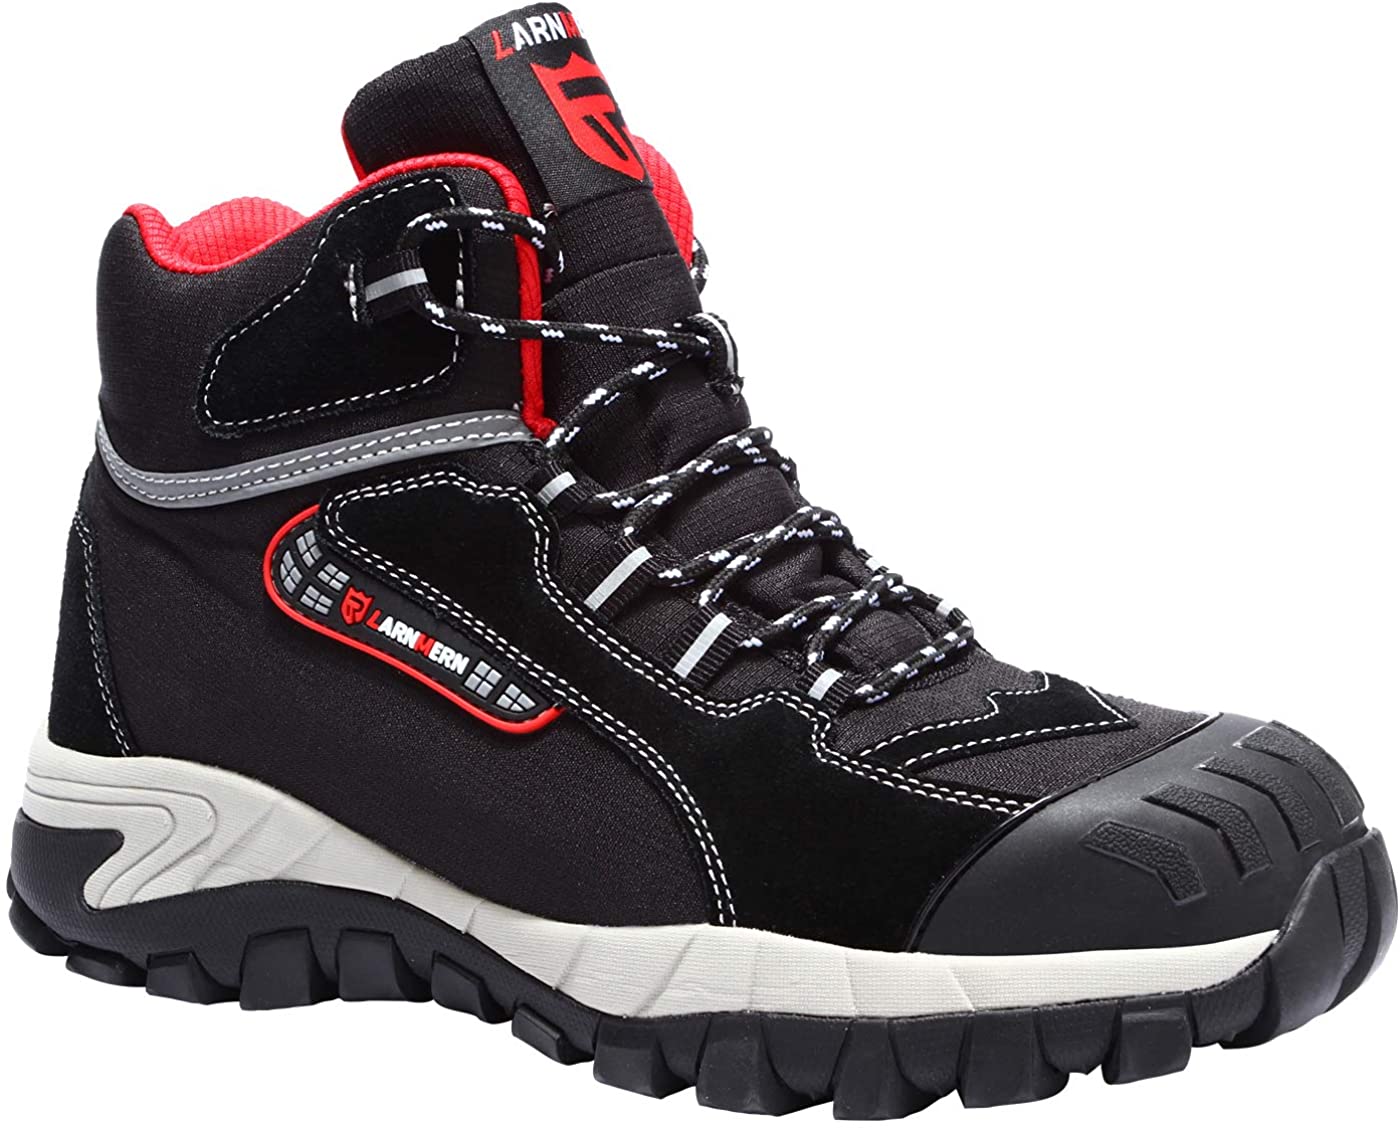 LARNMERN Steel Toe Boots,Mens Work Safety Outdoor Protection Footwear Industrial and Construction Boots 